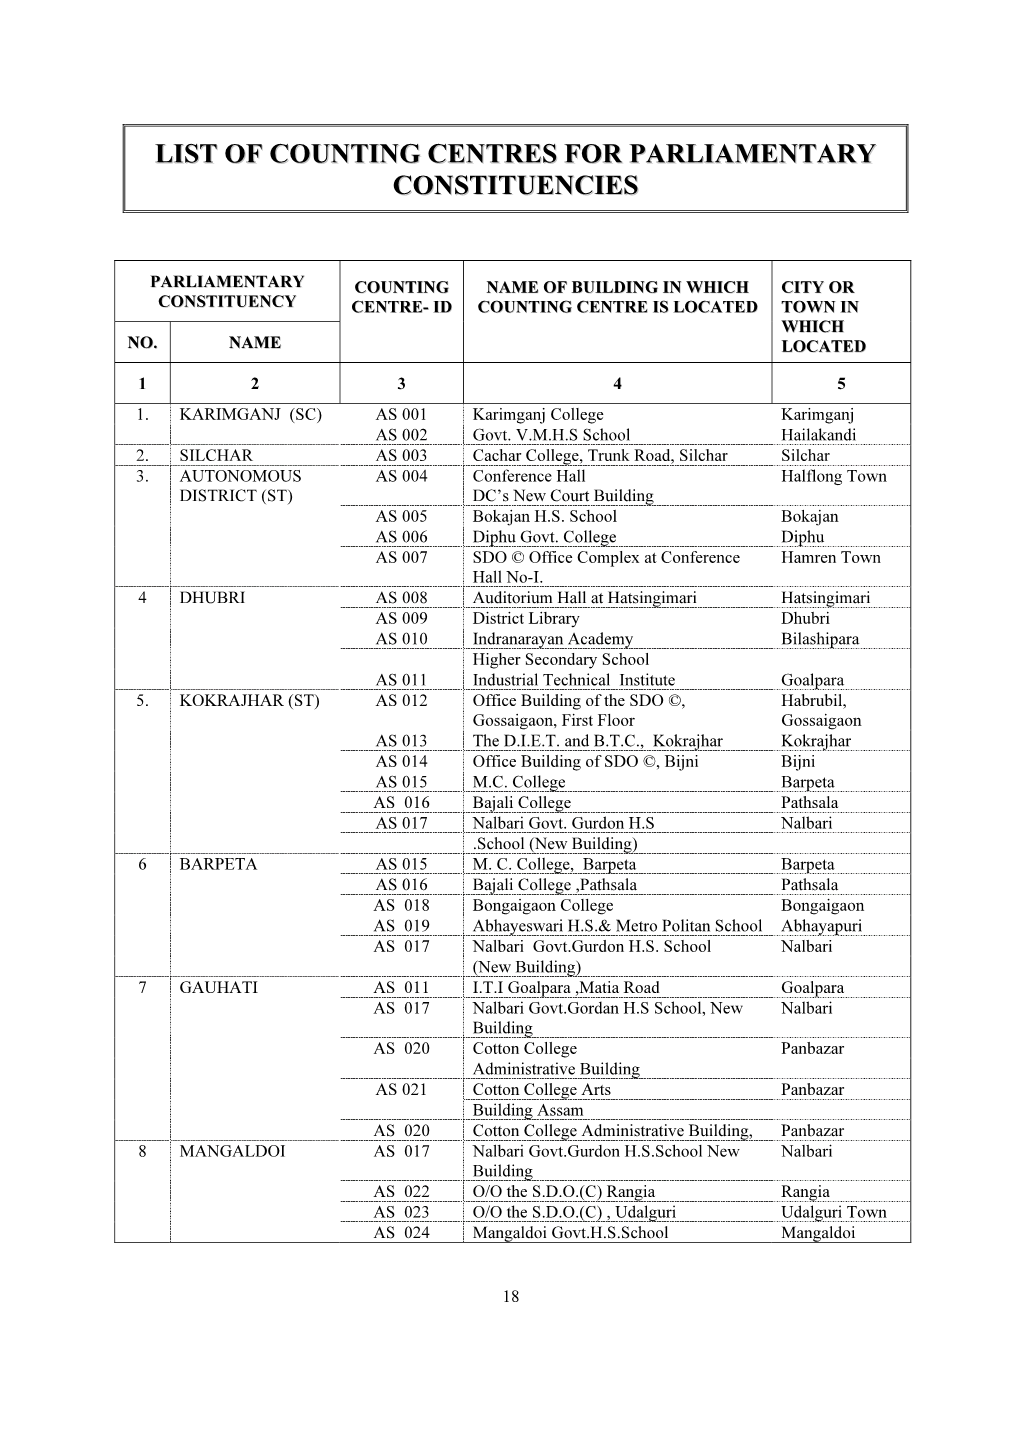 List of Counting Centres for Parliamentary Constituencies